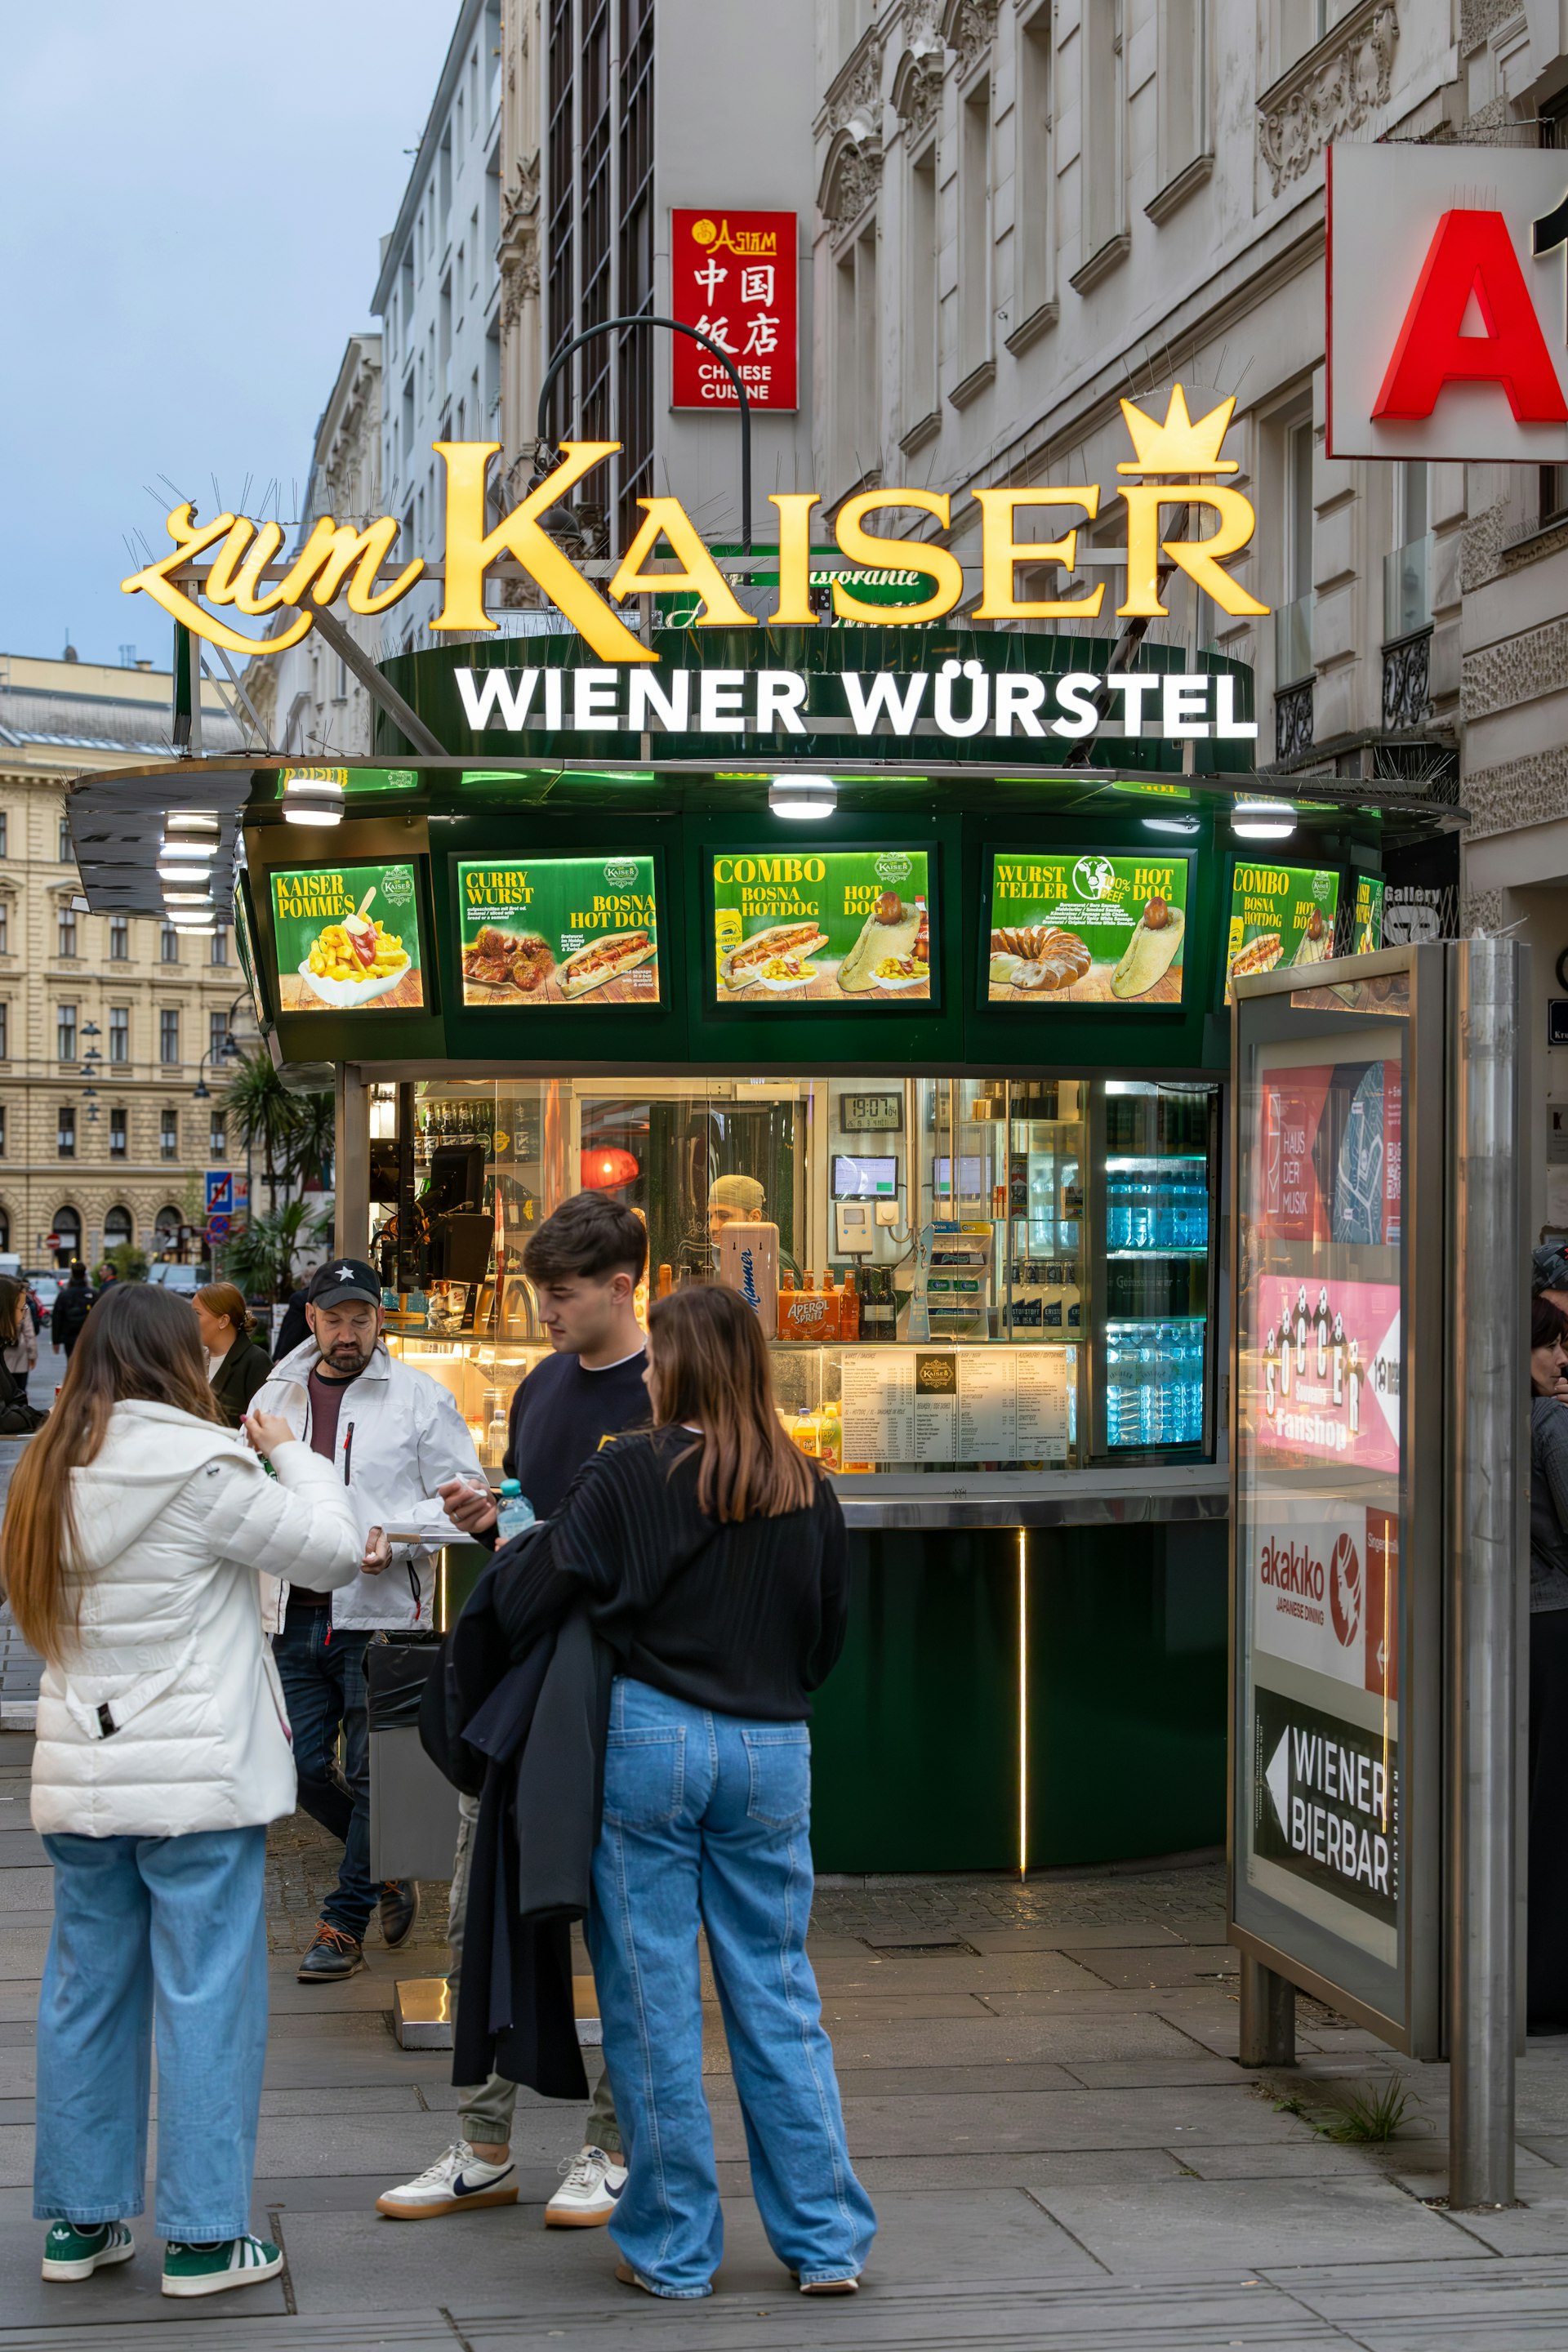 A group of three friends are standing beside a "Würstelstand" (sausage stand) in Vienna